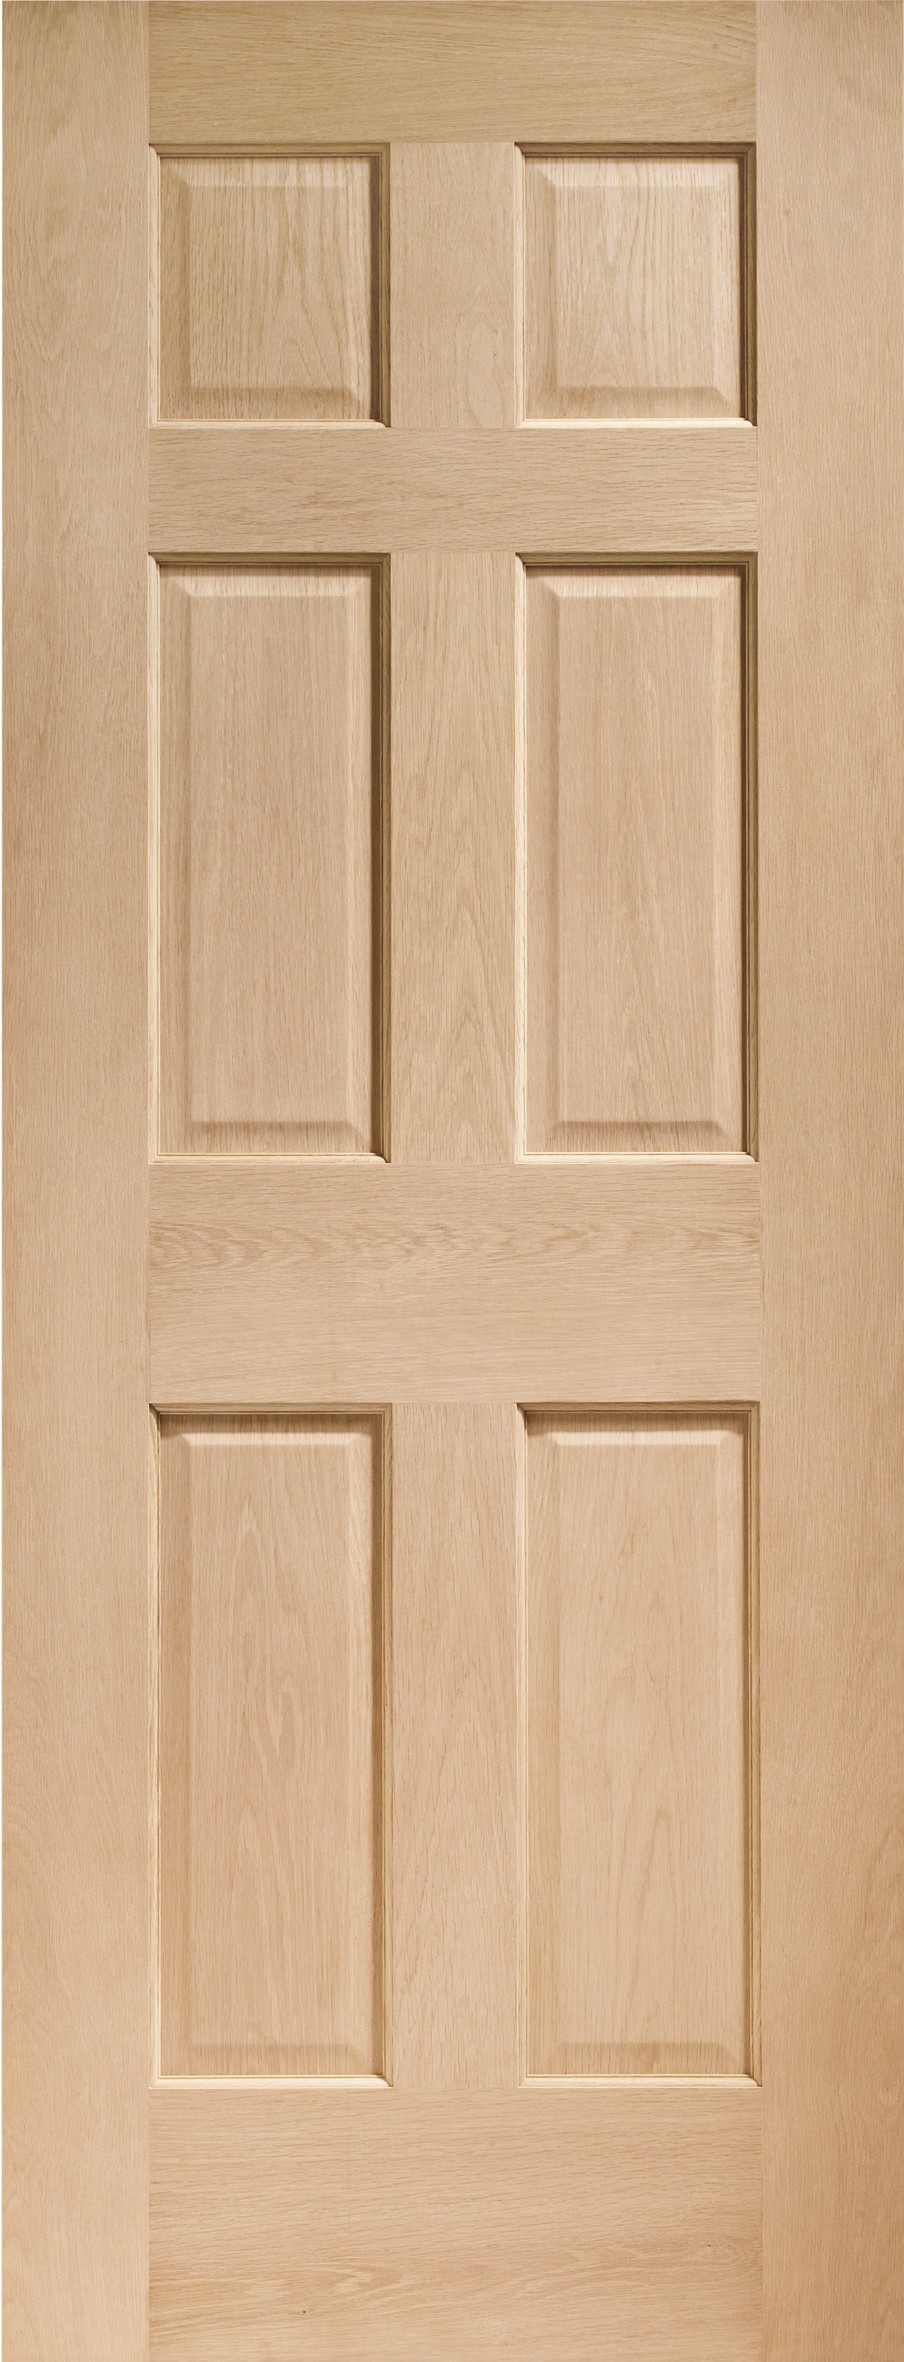 XL JOINERY DOORS -  INTOCOL27  Internal Oak Colonial 6 Panel  INTOCOL27